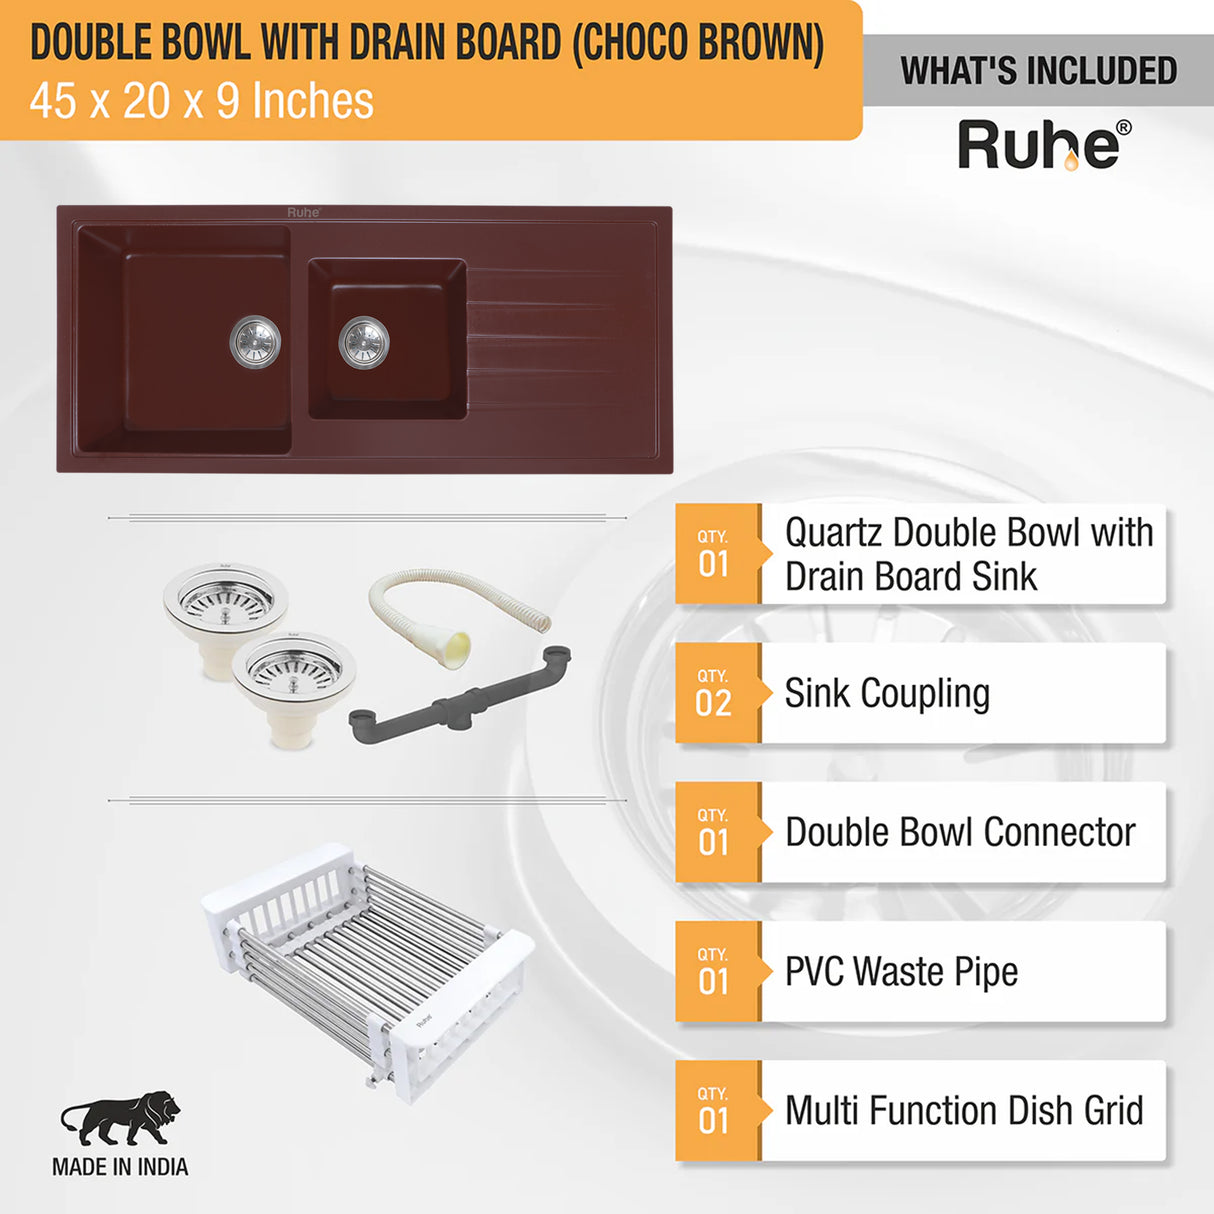 Quartz Double Bowl with Drainboard Kitchen Sink - Choco Brown (45 x 20 x 9 inches) - by Ruhe®